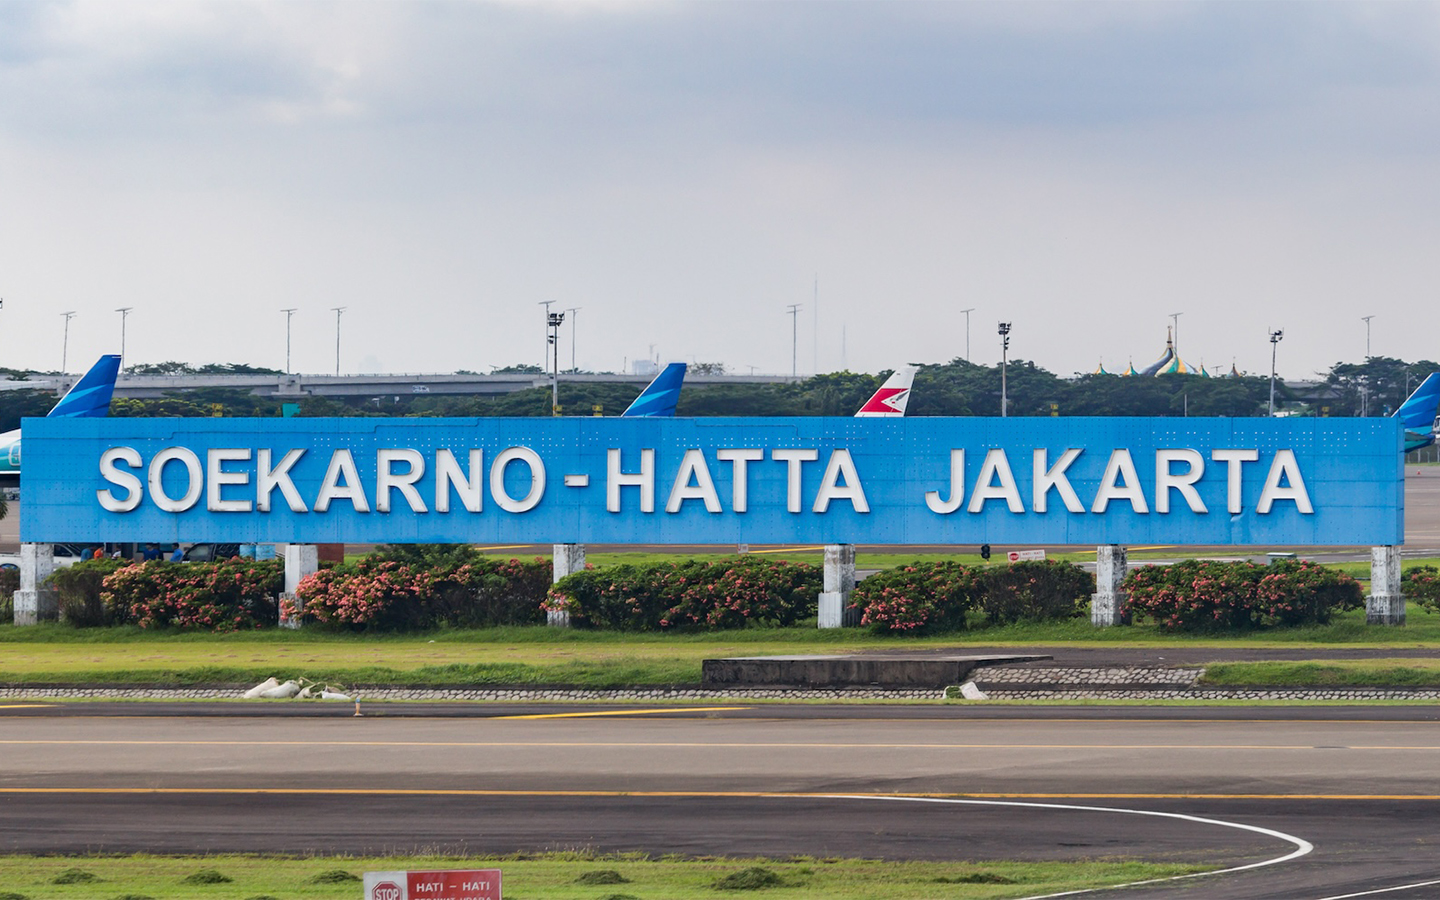 The first direct air service to Jakarta started today